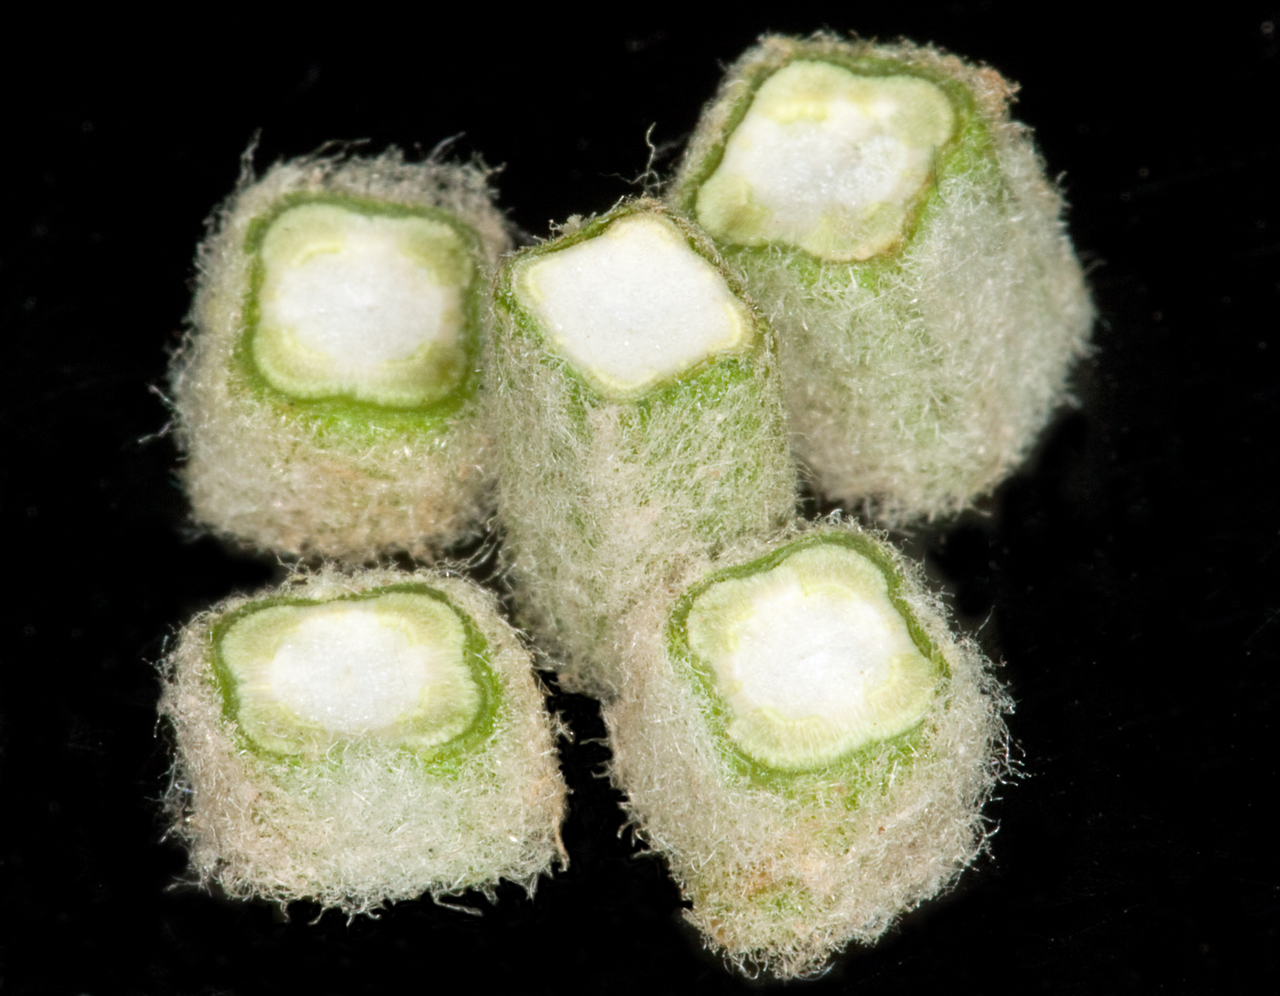 Cross-sections of the fuzzy, square stem.